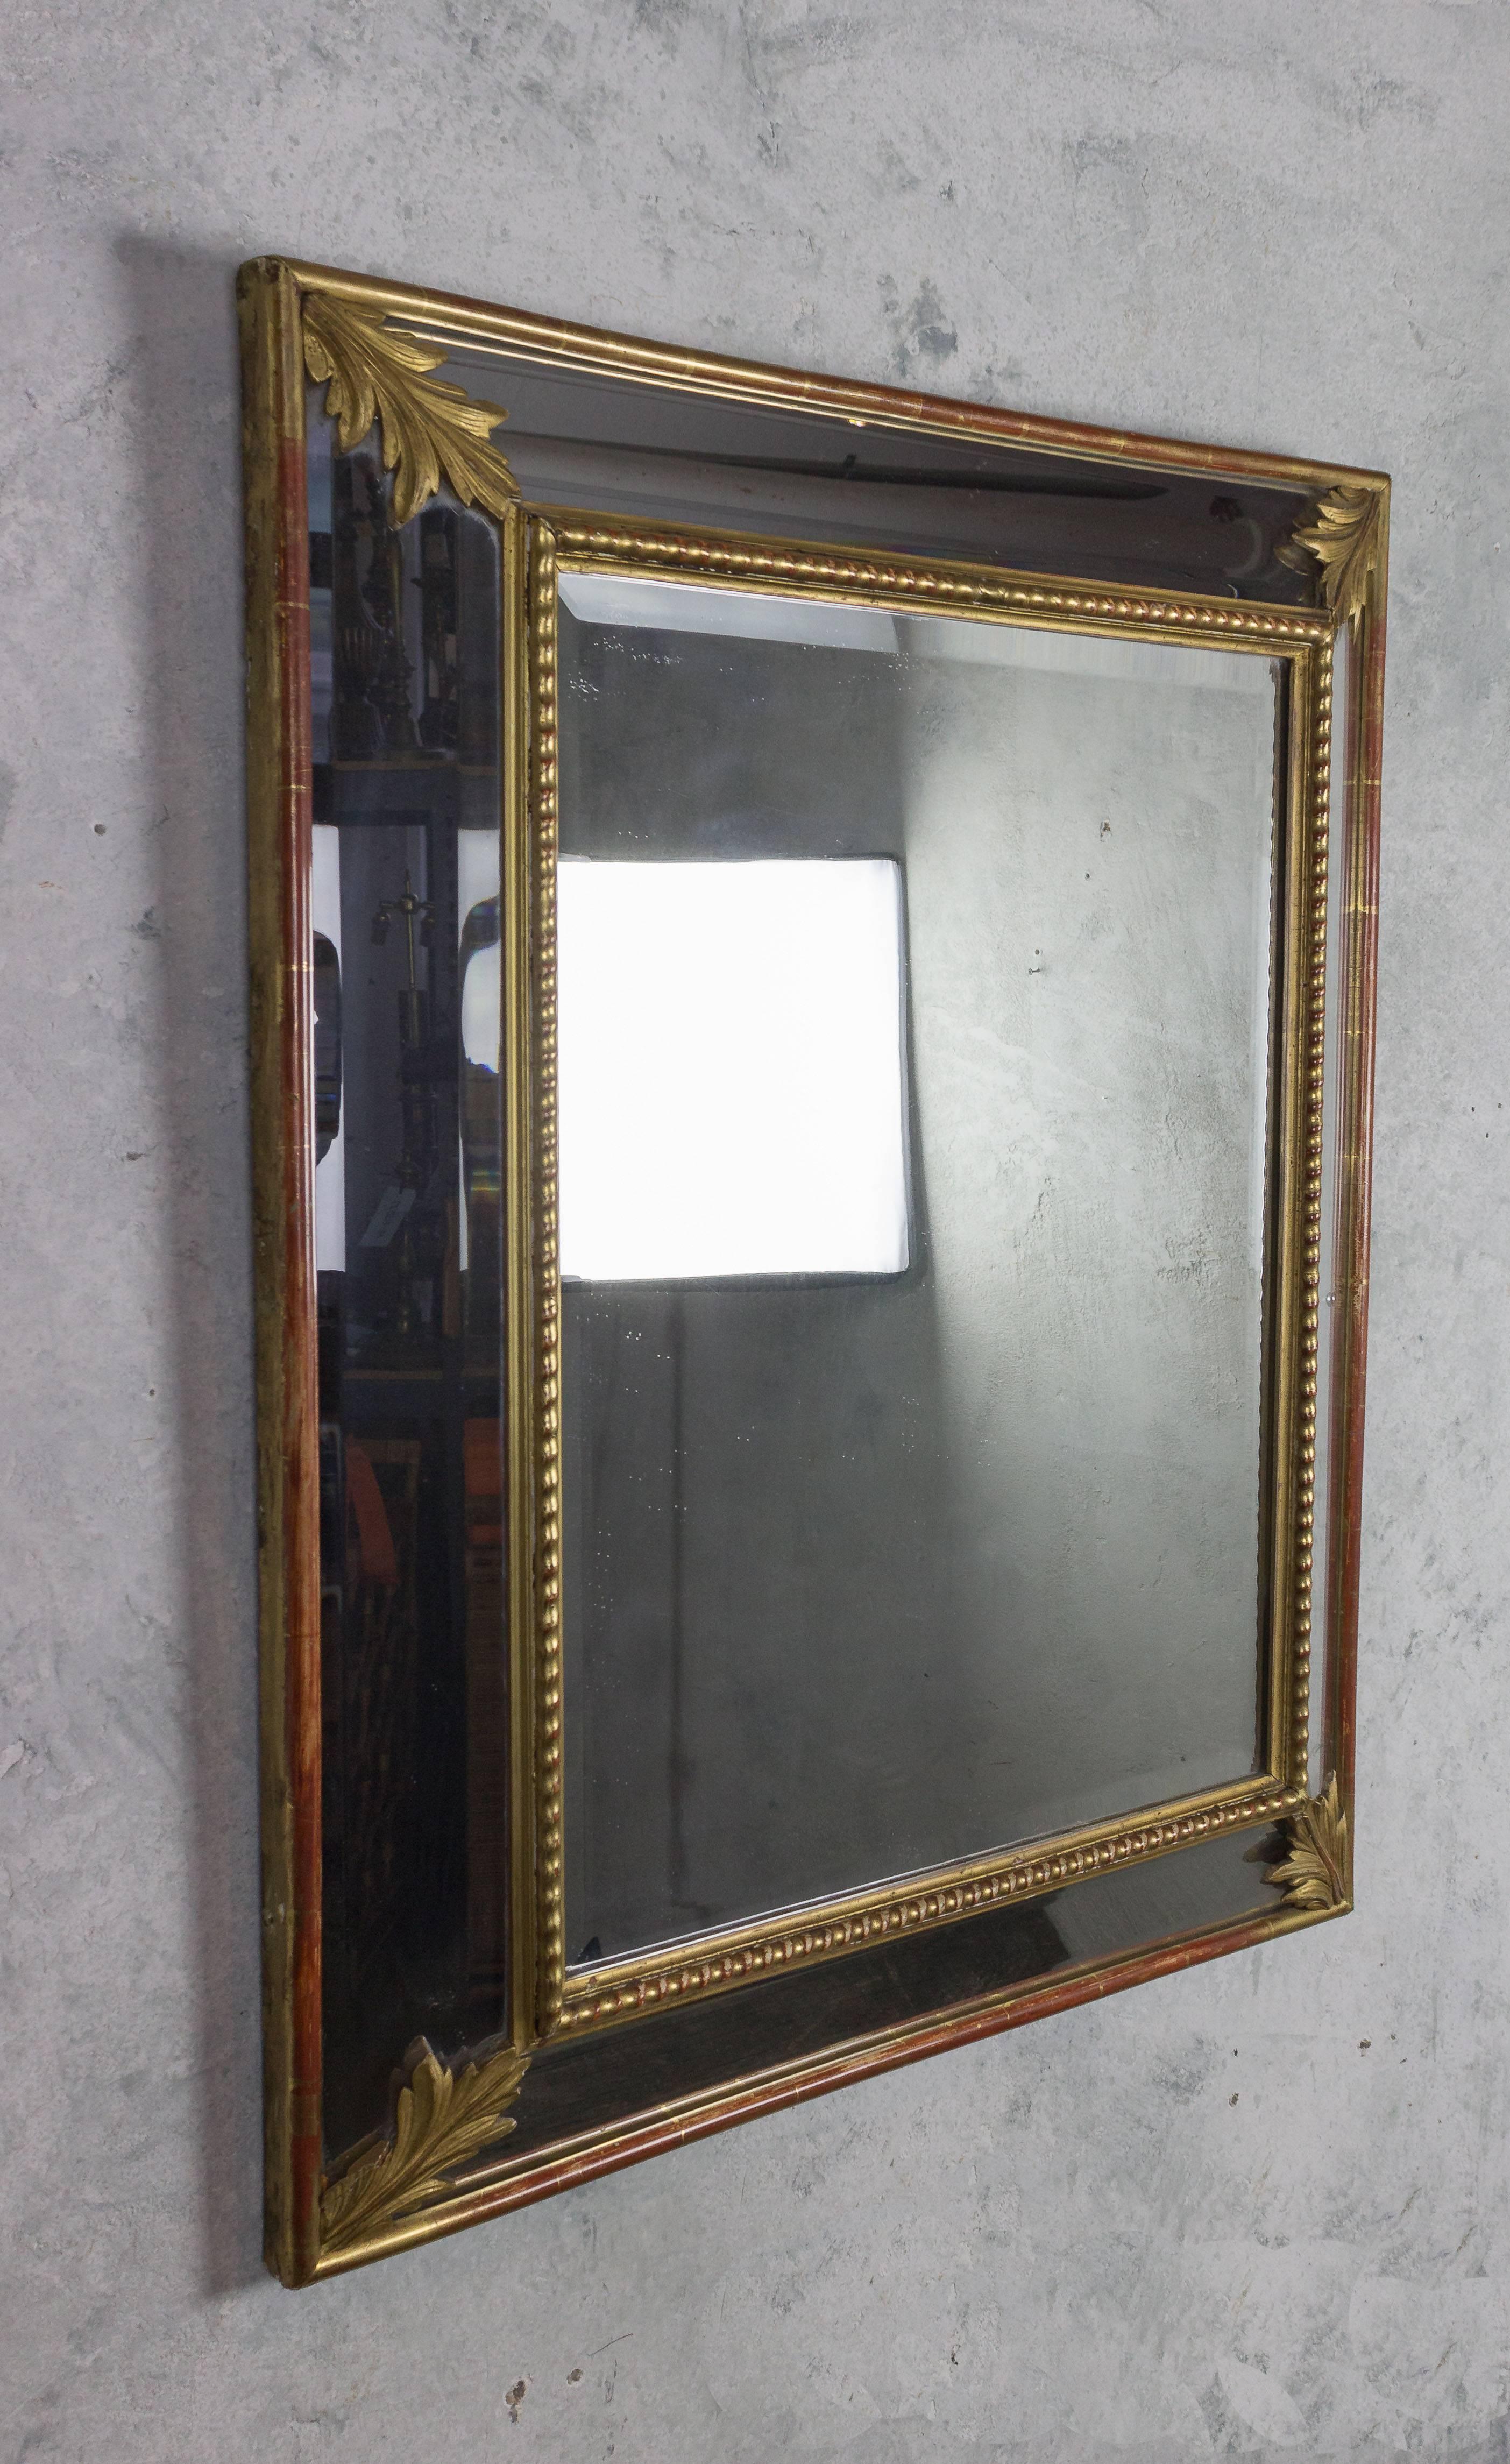 Elegant carved and beveled giltwood mirror with inset mirrored panels. French, late 19th century. Very good vintage condition.

Ref #: DM0307-06

Dimensions: 38”H x 32